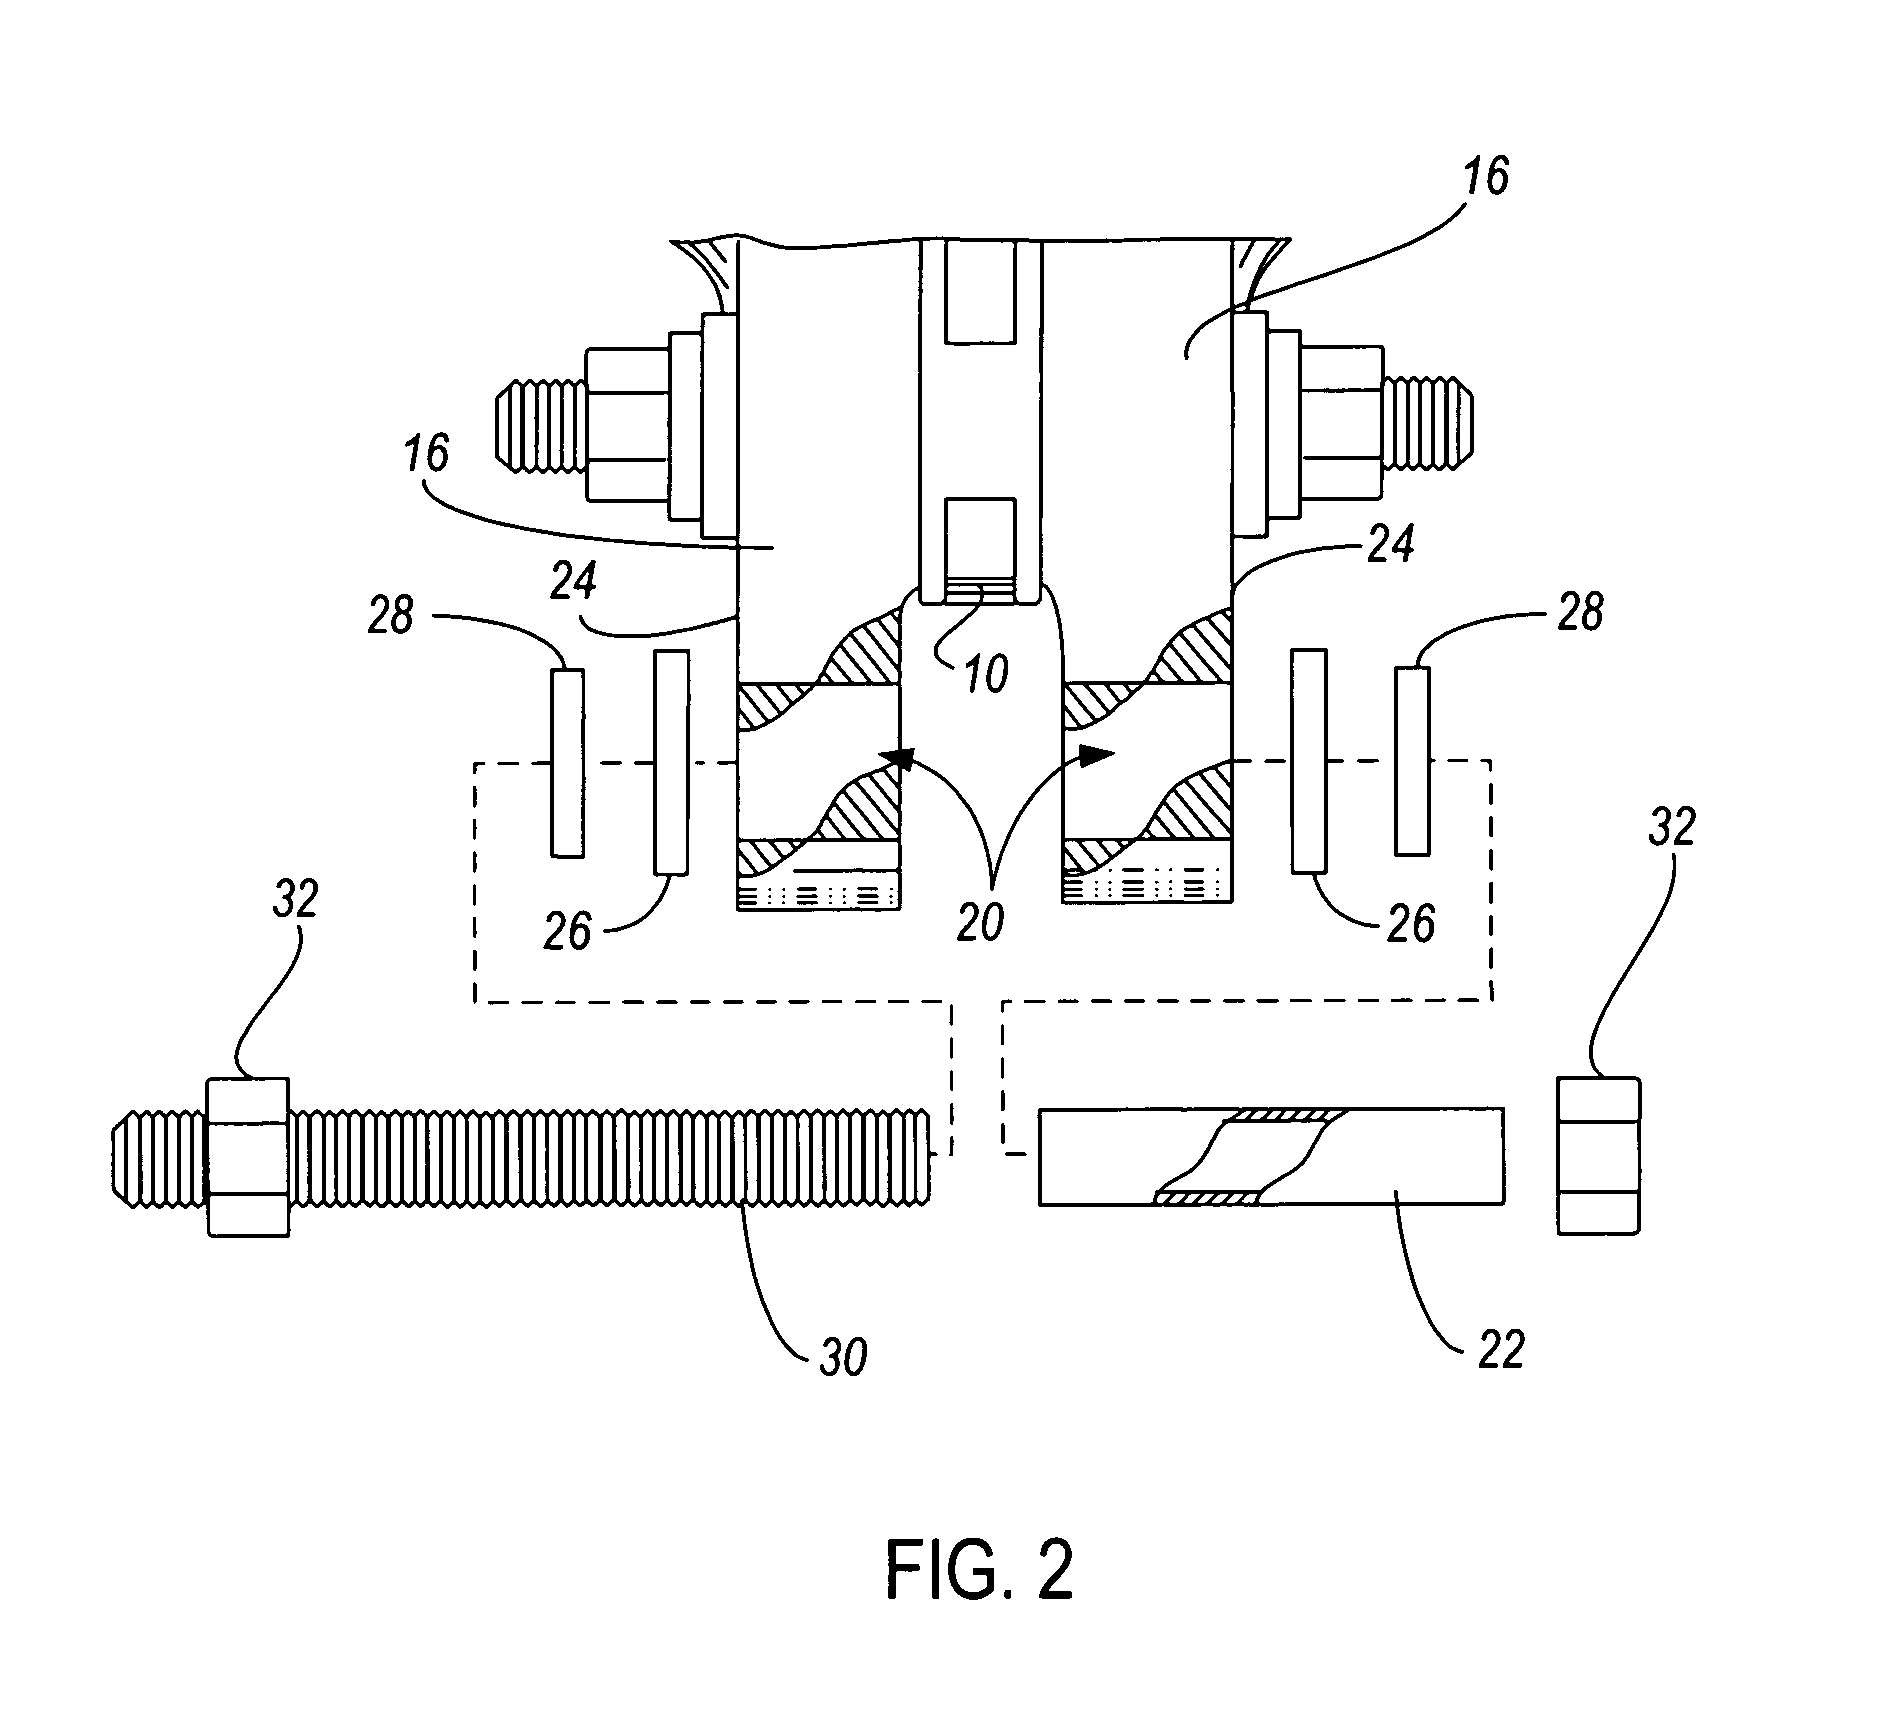 Isolation gasket, system and method of manufacture